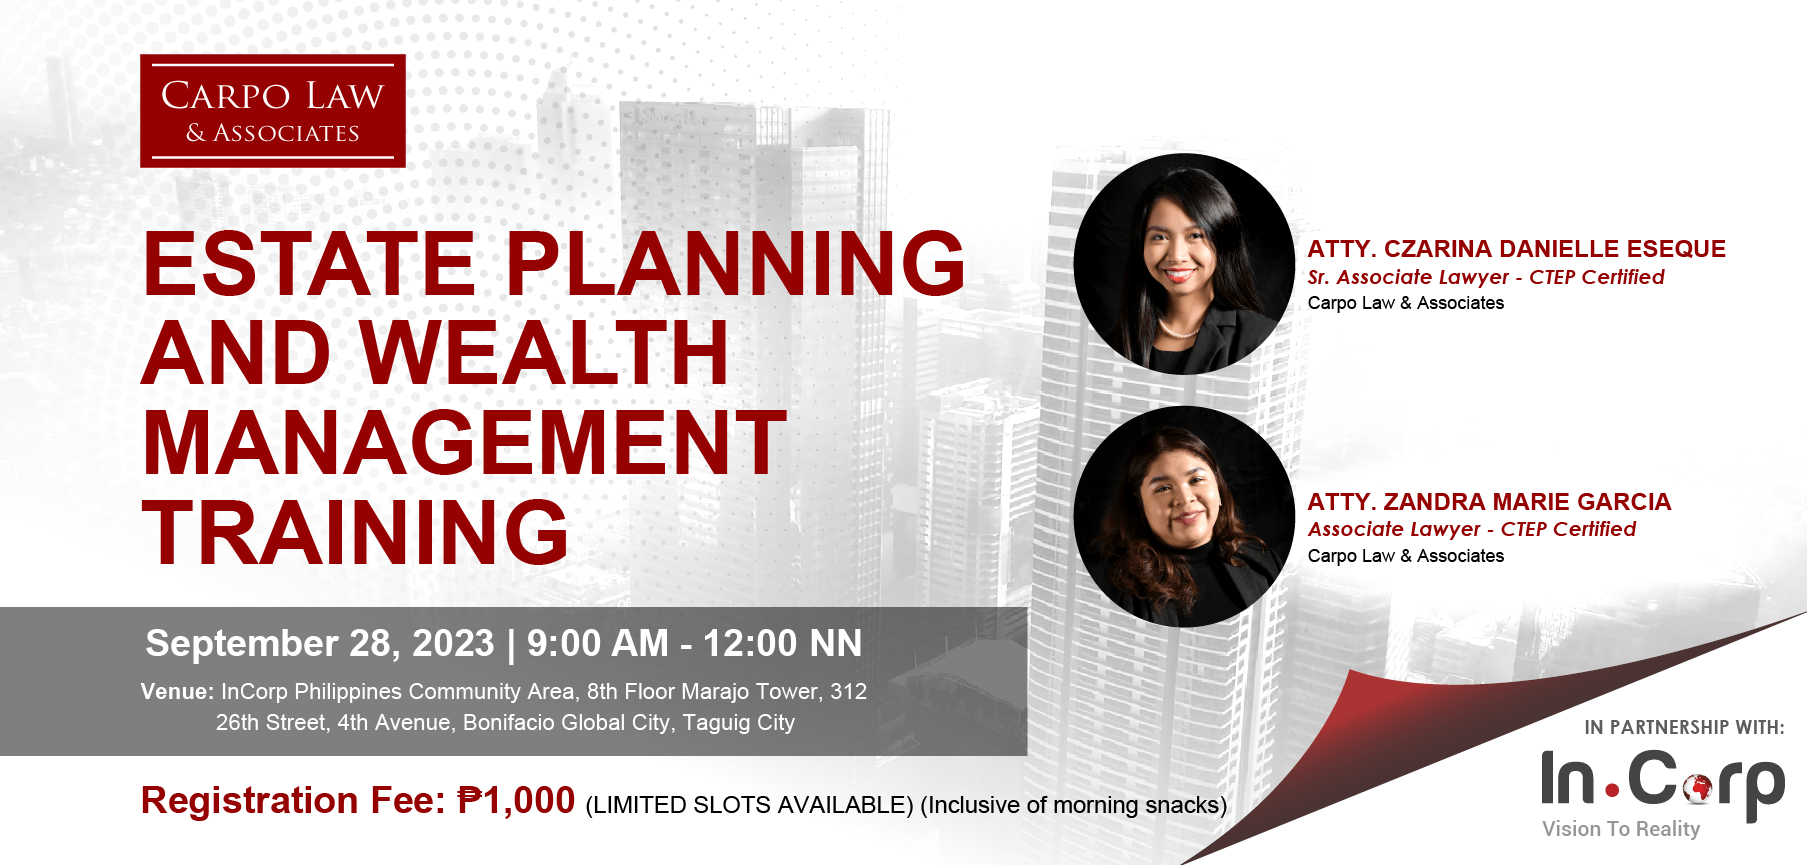 [Event] Estate Planning and Wealth Management Training